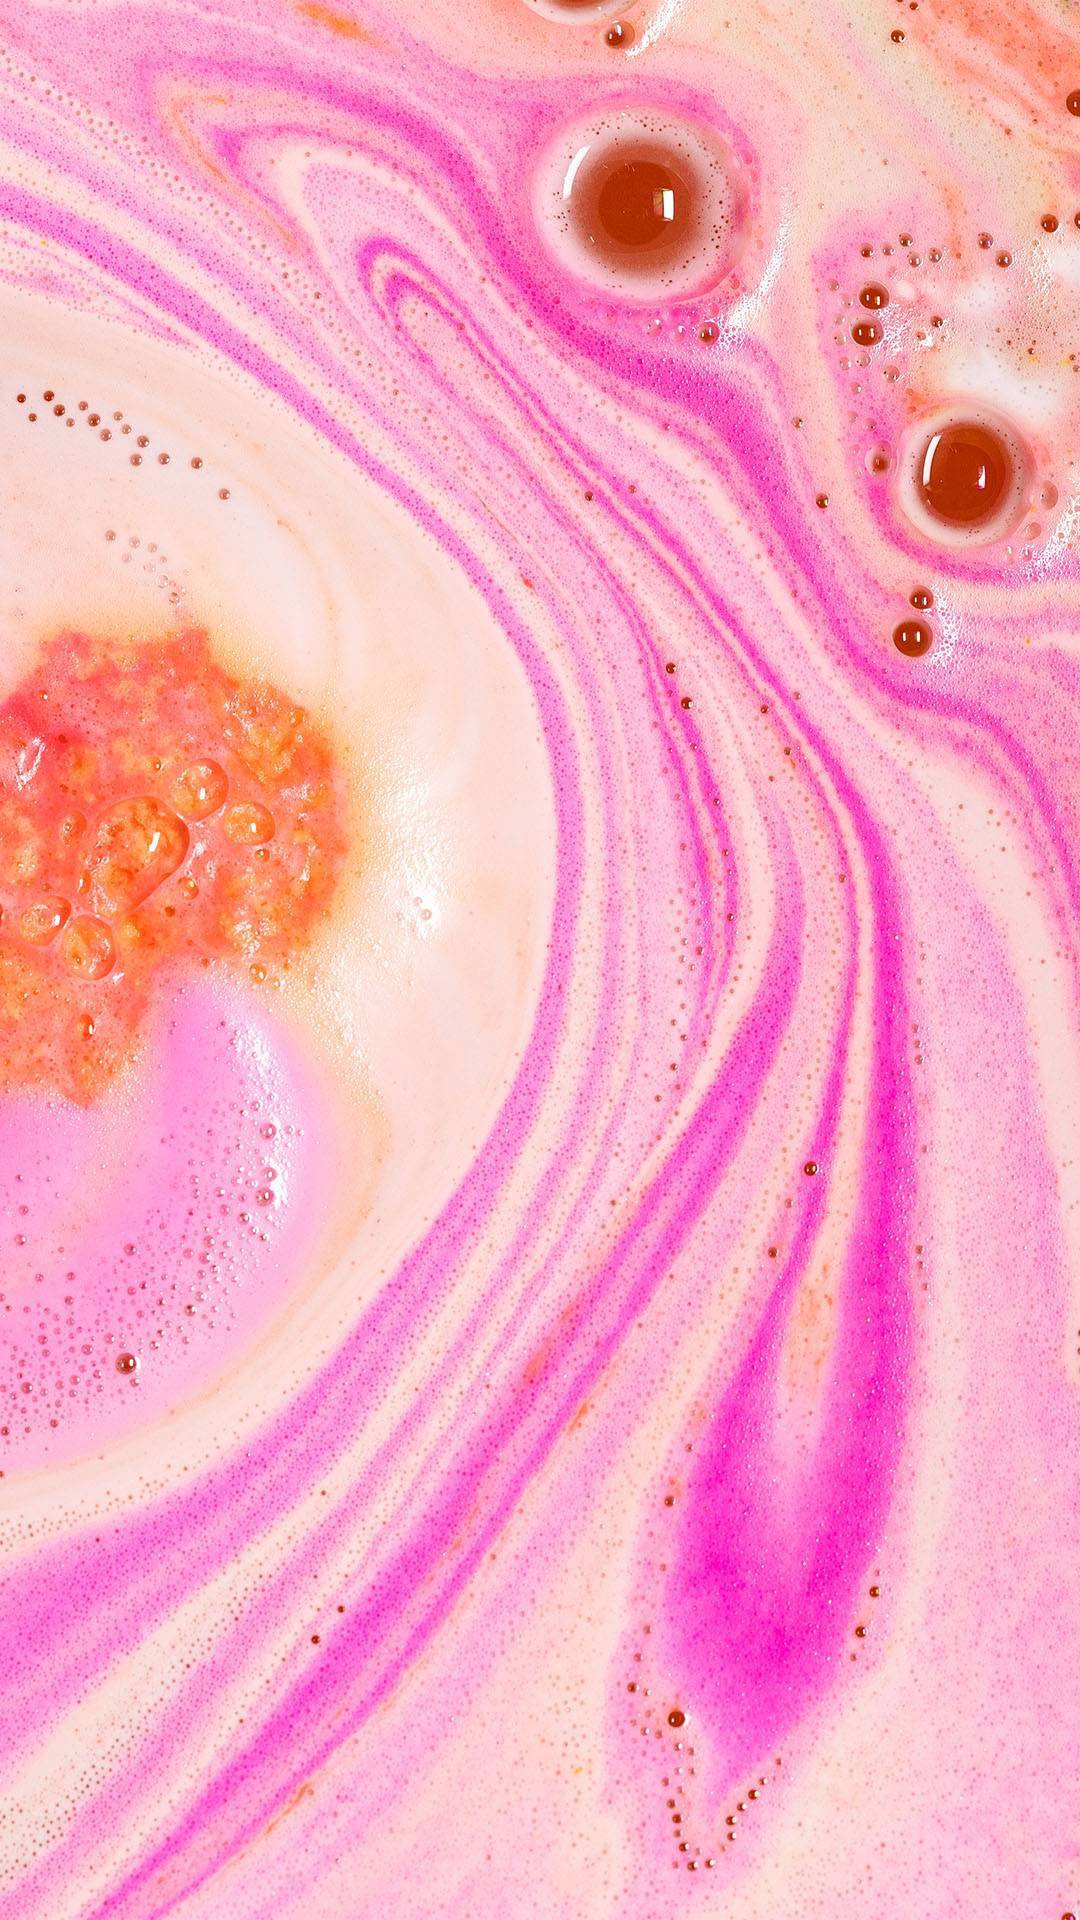 The Peachy bath bomb has almost fully dissolved leaving behind thick, colourful ripples of pink and peach-coloured, velvety foam. 